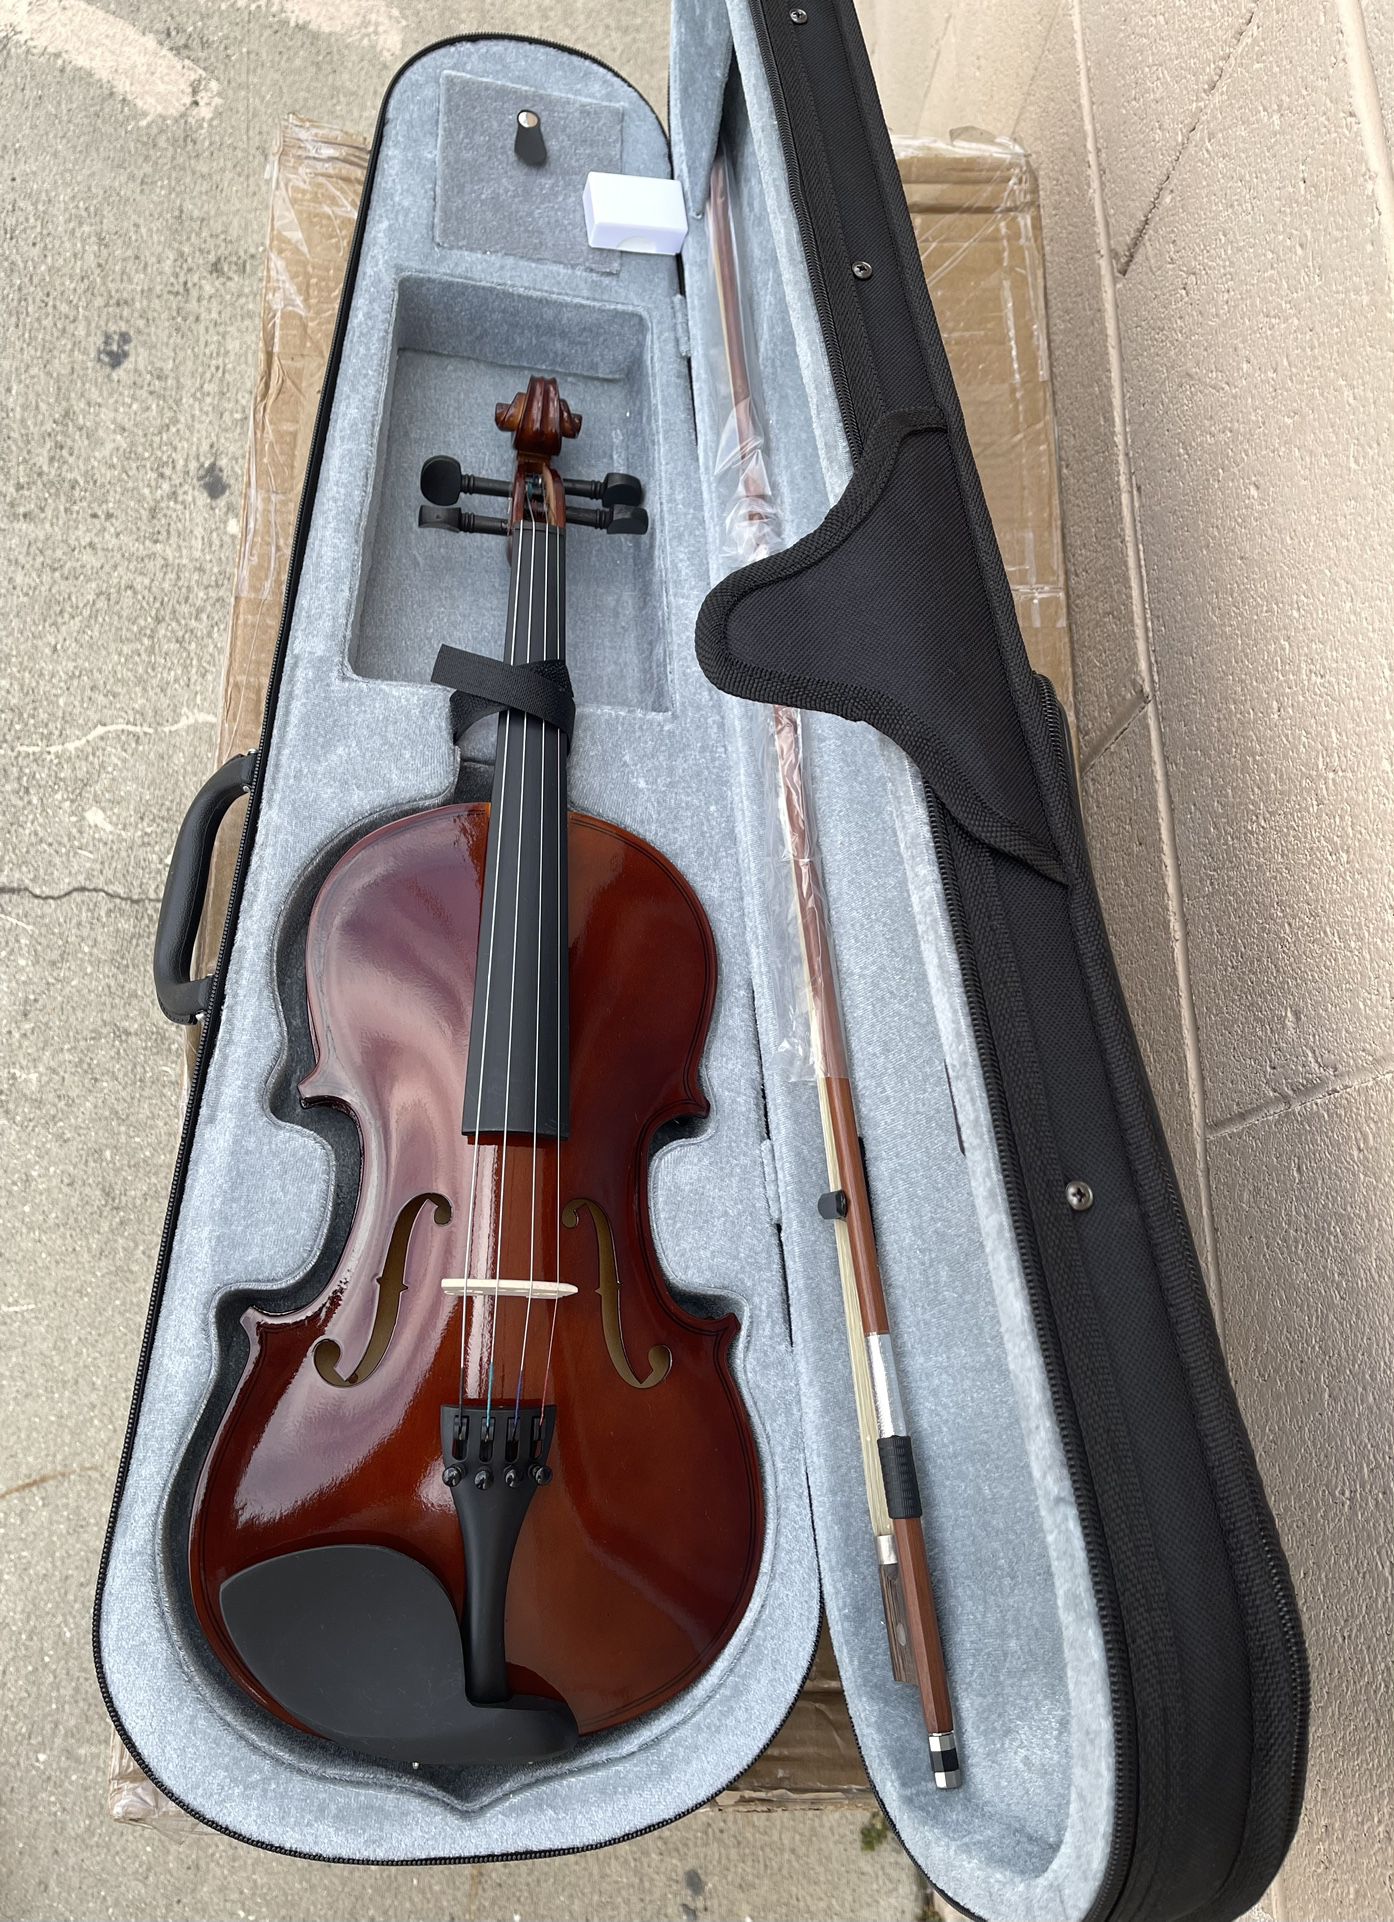 New Violin 🎻 Starting $60 Ready To Play 